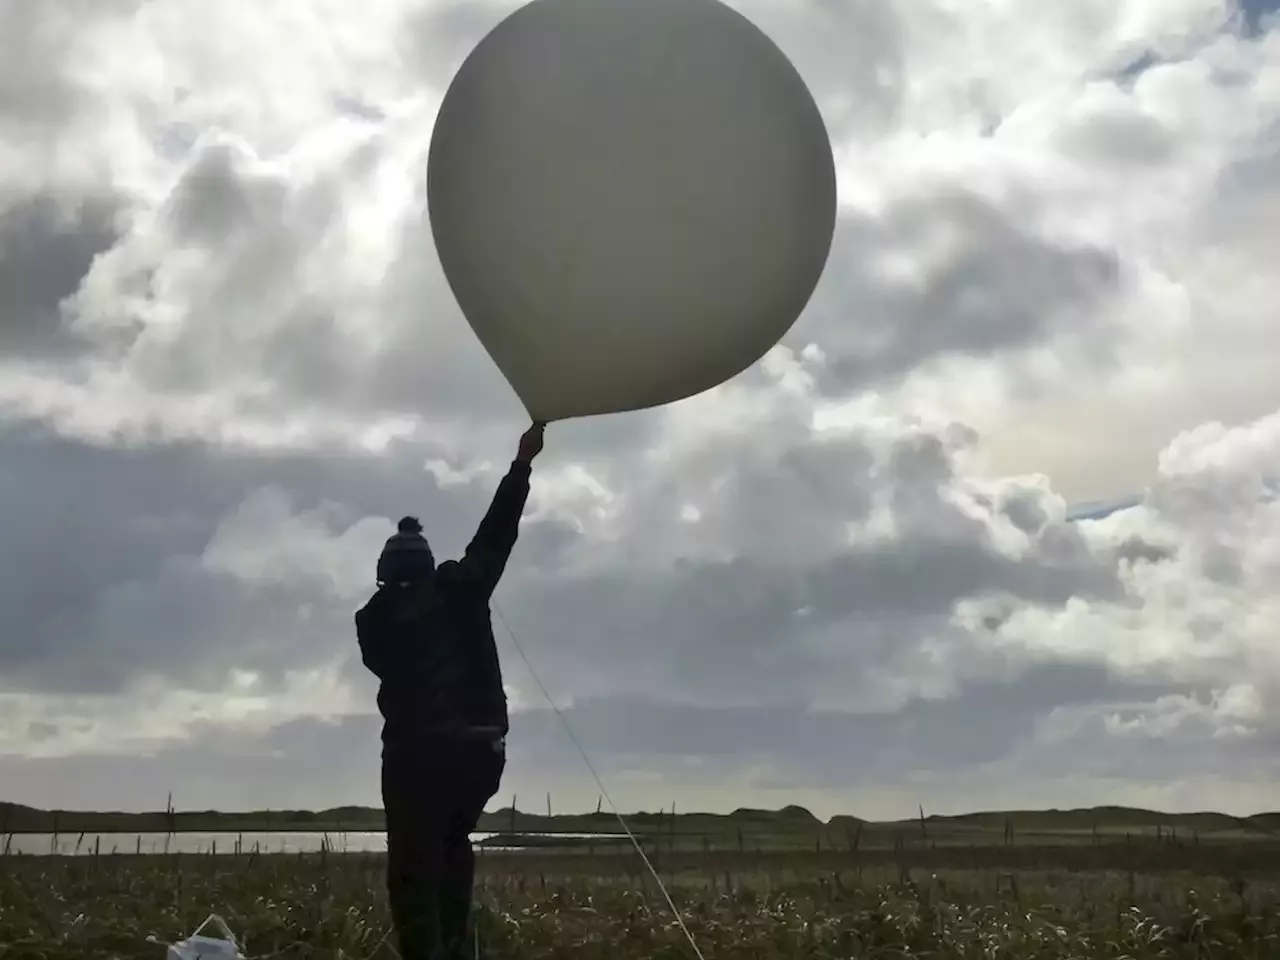 Alaska weather balloons are key in predicting snow's fluffiness ...